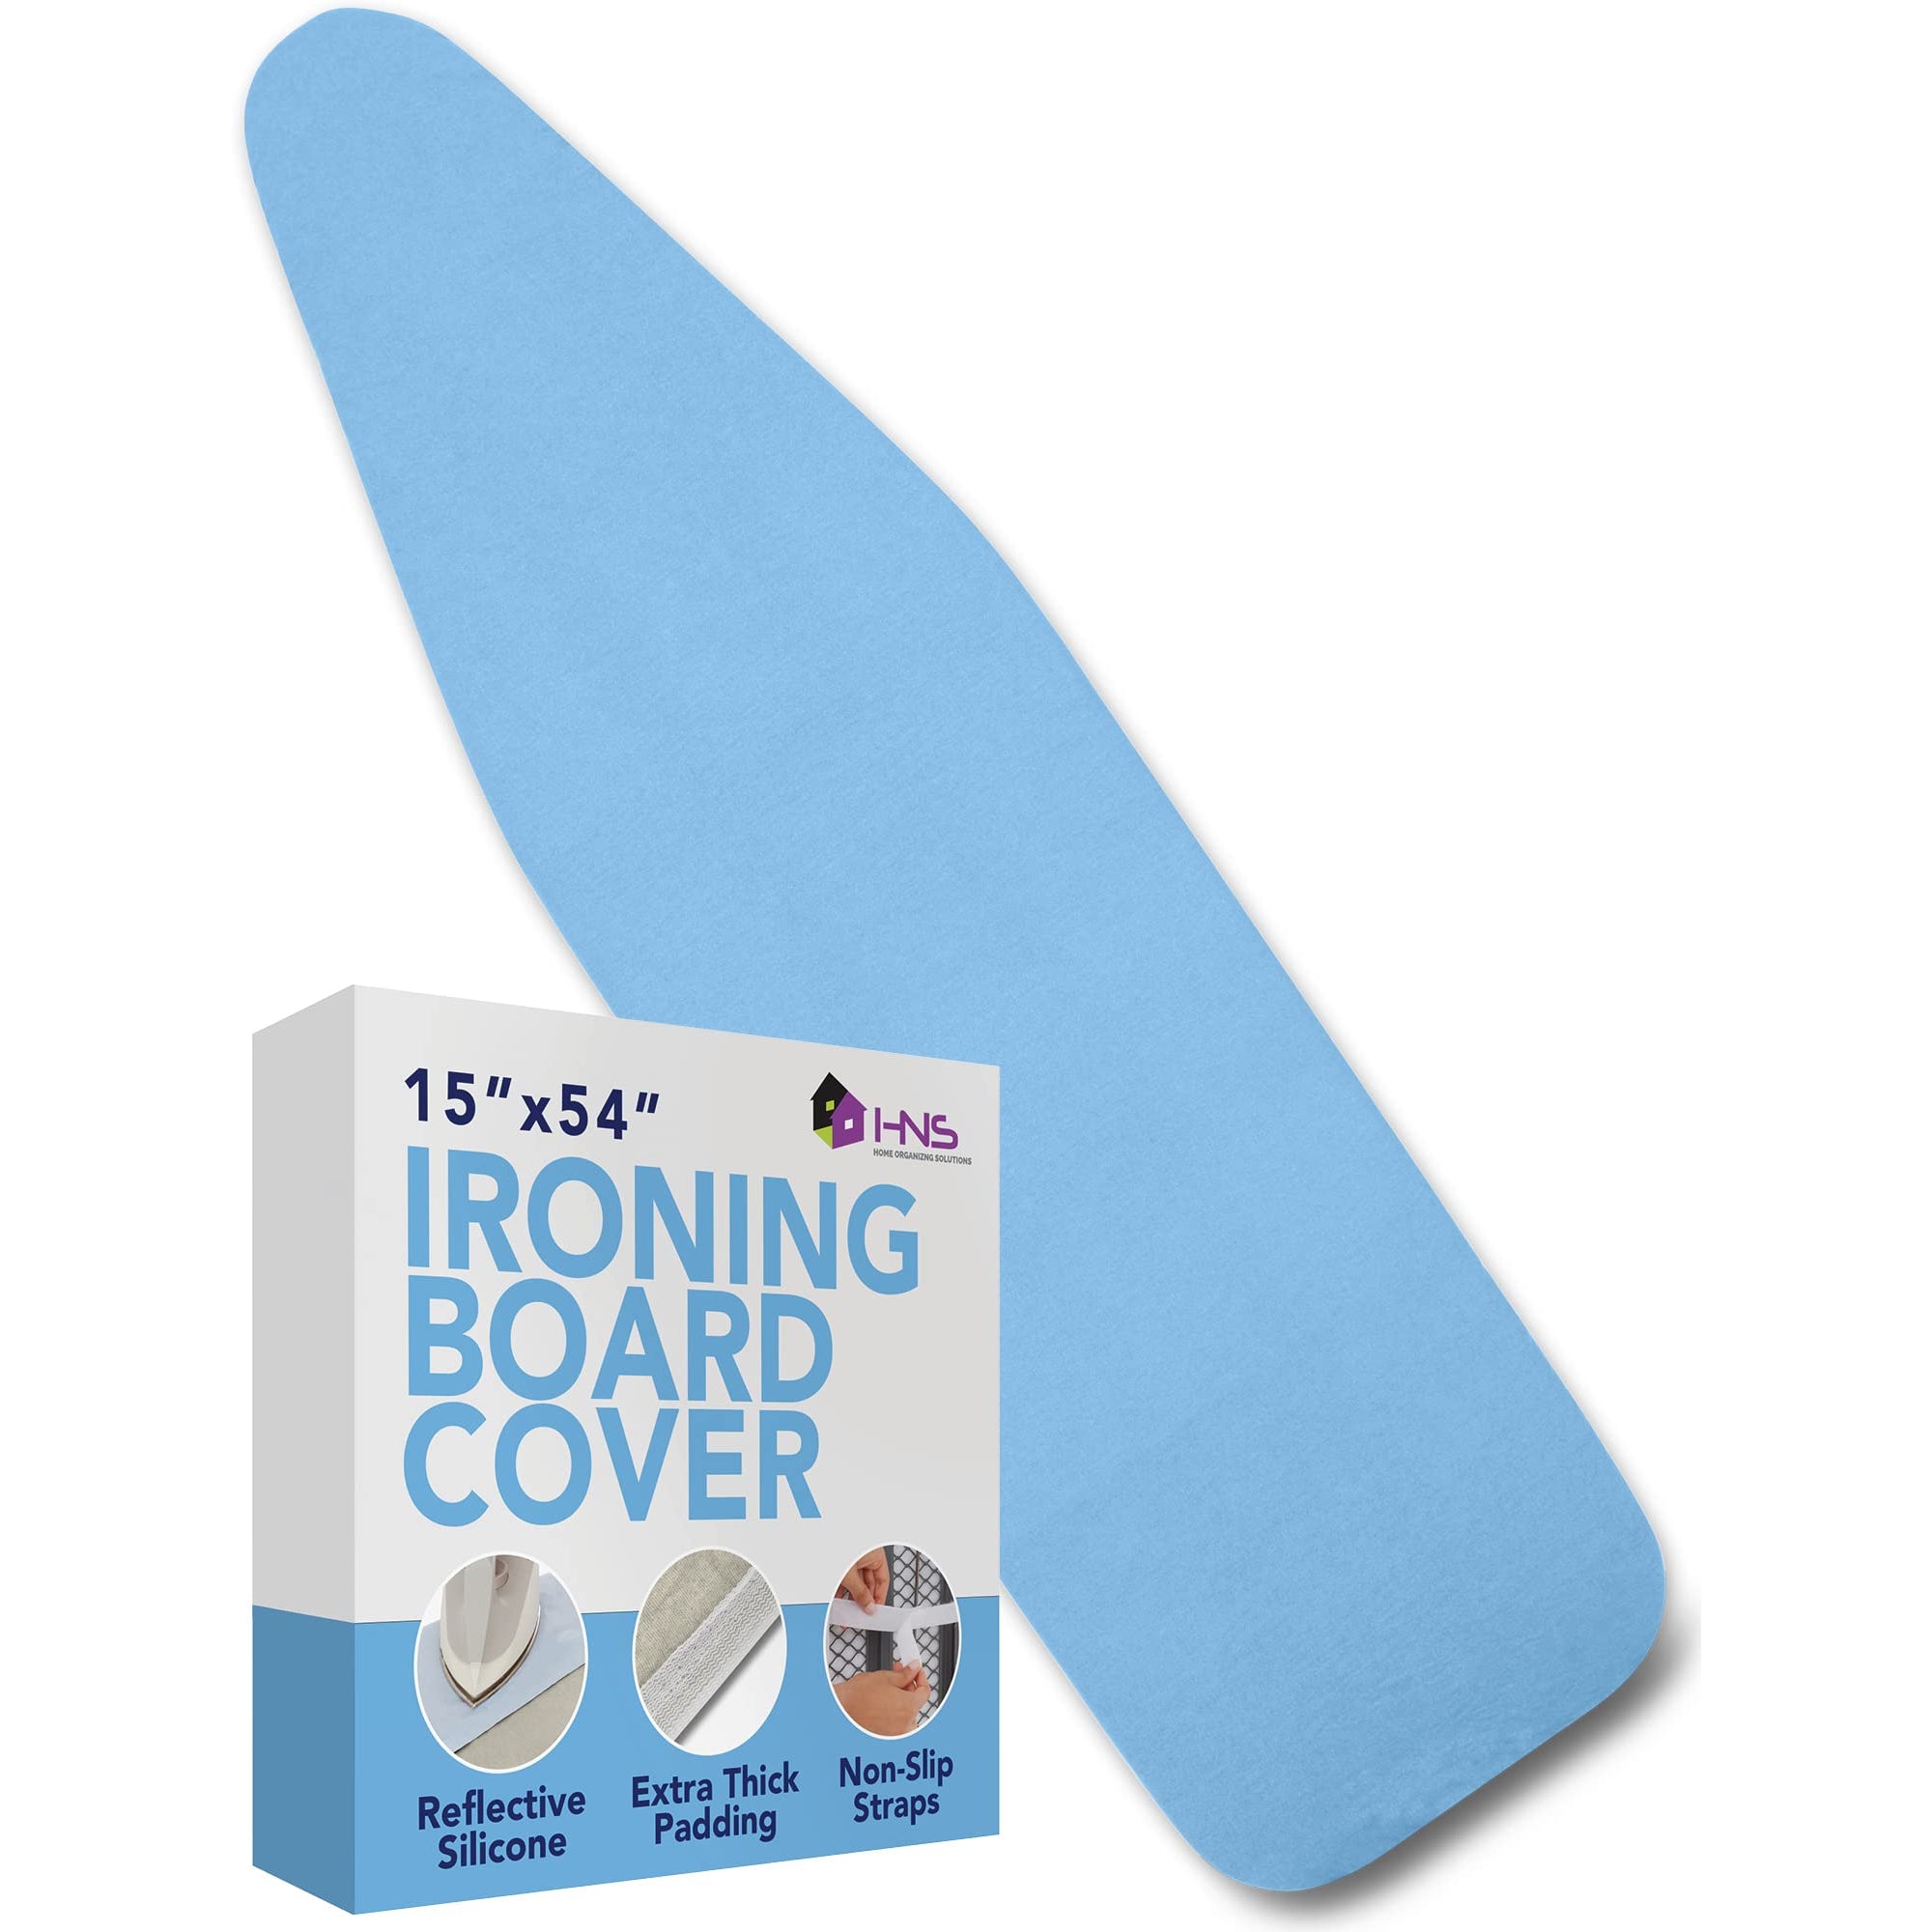 HOLDN’ STORAGE Iron Board Cover with Padding - Ironing Board Cover and Pad 15" x 54" - Large Iron Board Cover - Iron Pad for Table Top